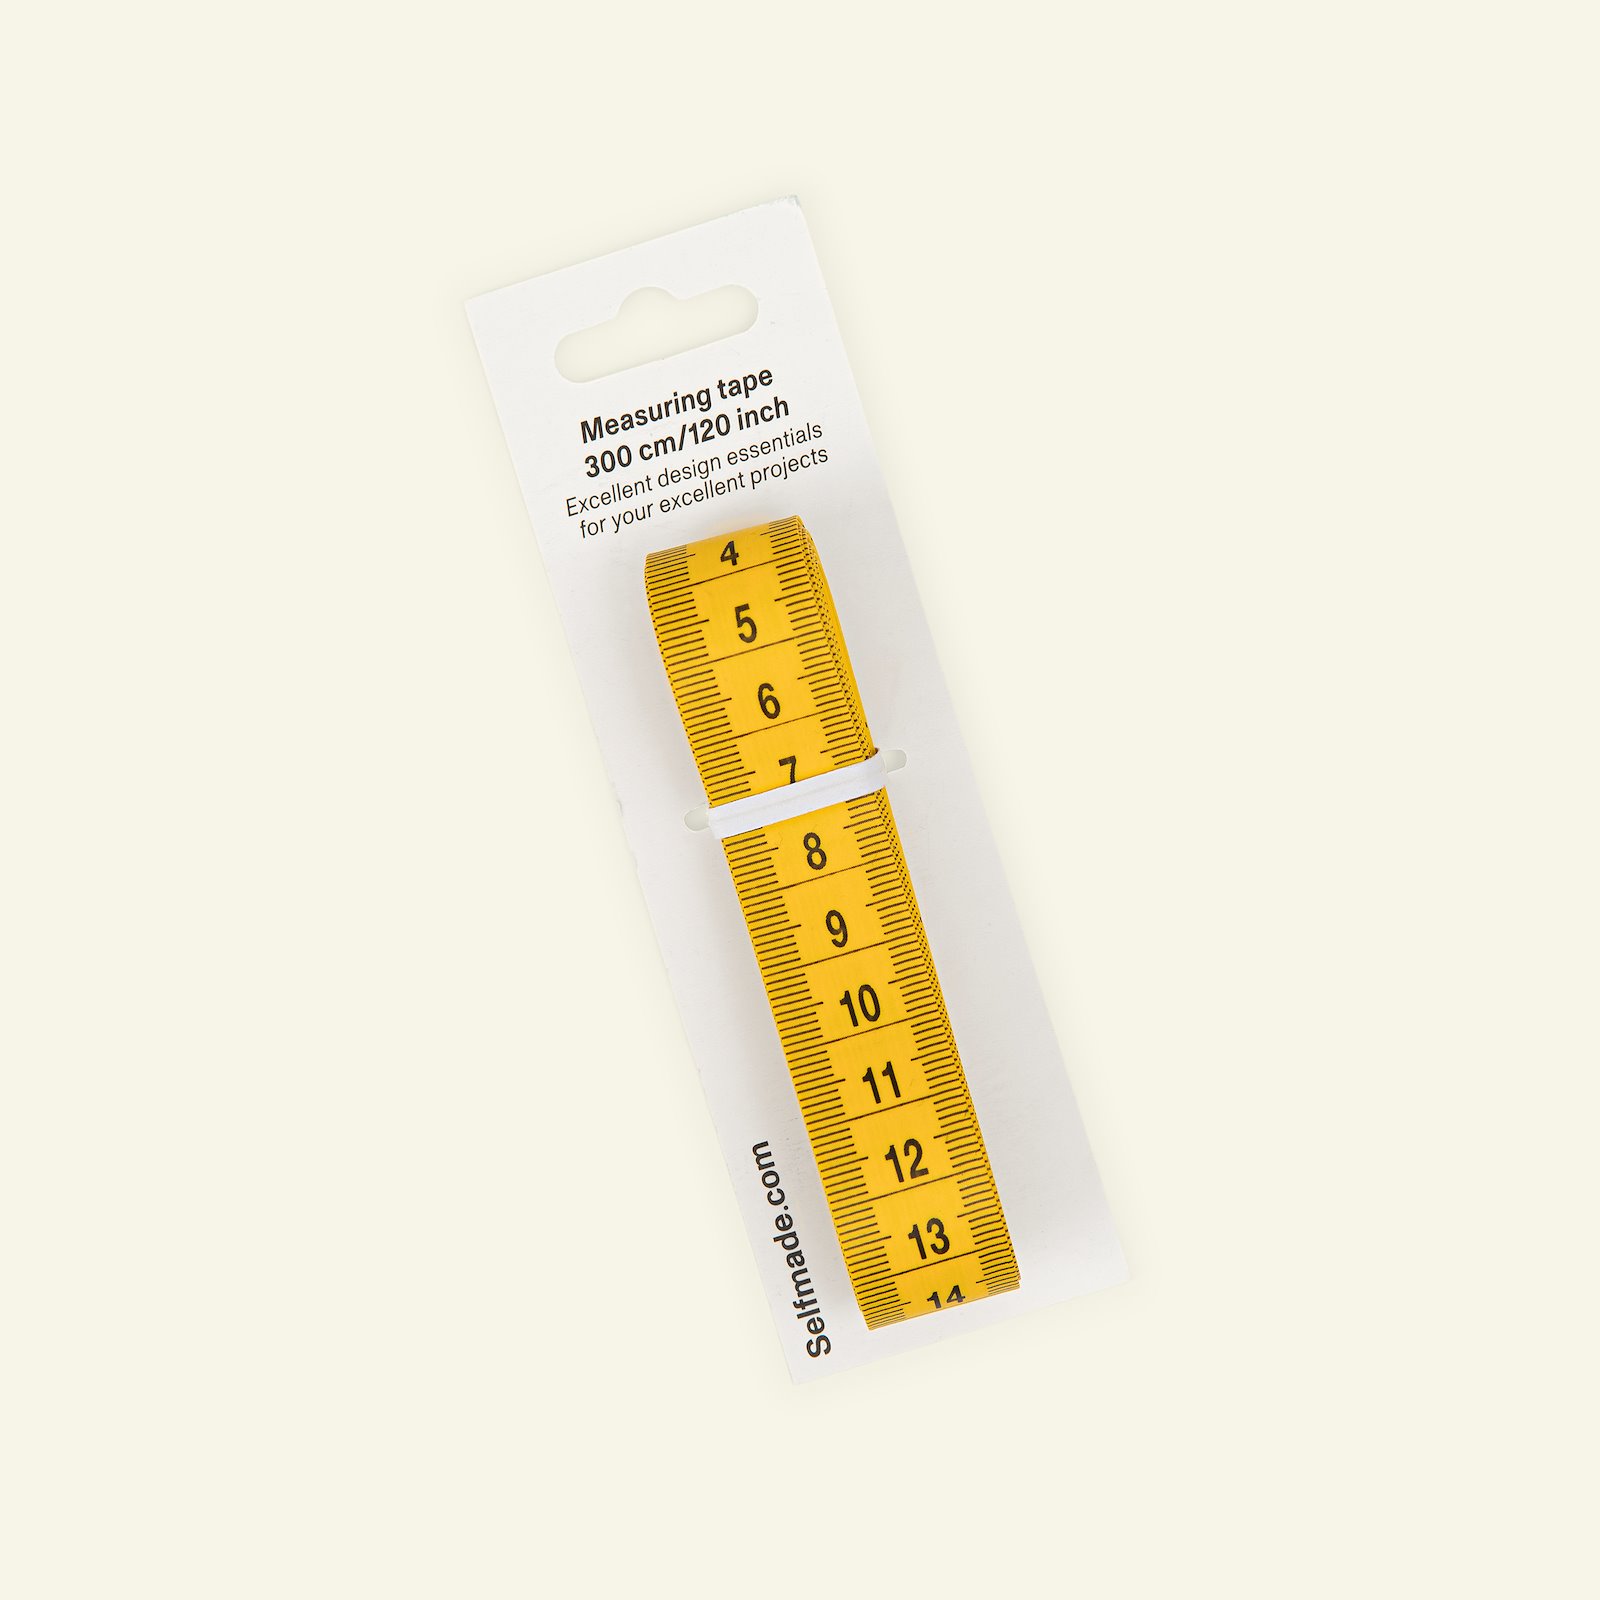 Measuring tape 300cm/120inch yellow 1pc 40907_pack_b